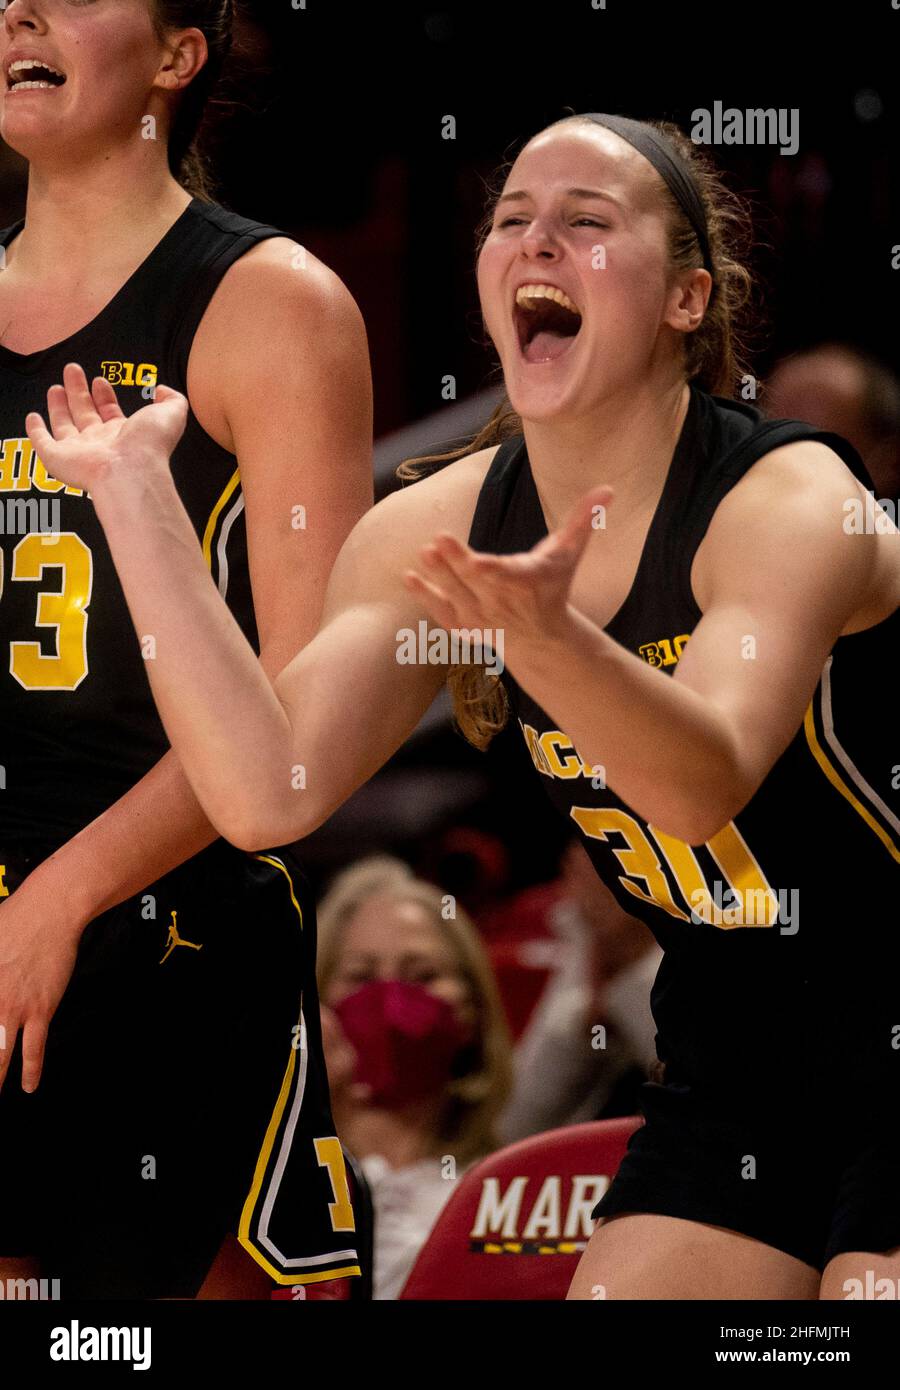 COLLEGE PARK, MD - JANUARY 16: Michigan Wolverines guard Elise Stuck (30) after her team takes a big lead during a Big10 women's basketball game betwe Stock Photo